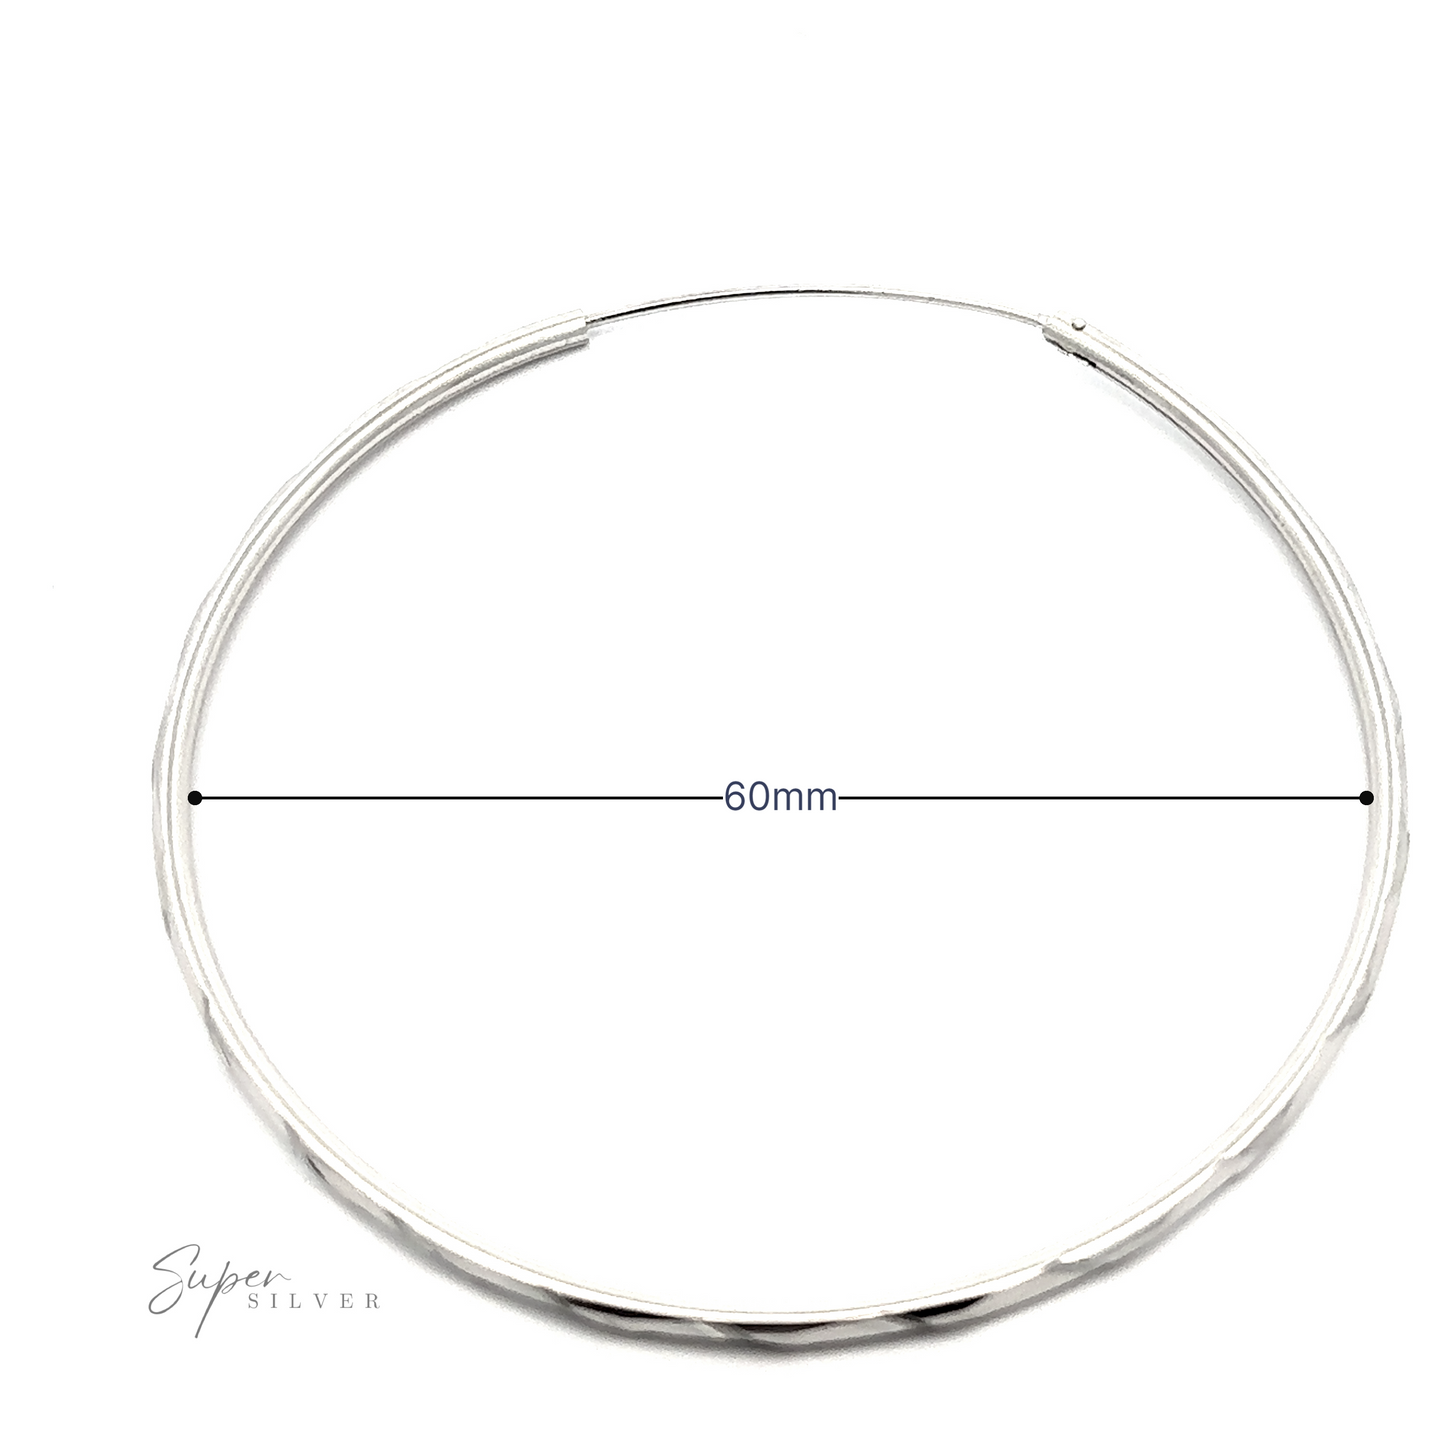 
                  
                    A plain rhodium-plated silver bangle bracelet with a 60mm diameter, displayed against a white background with a measurement indicator.
                  
                